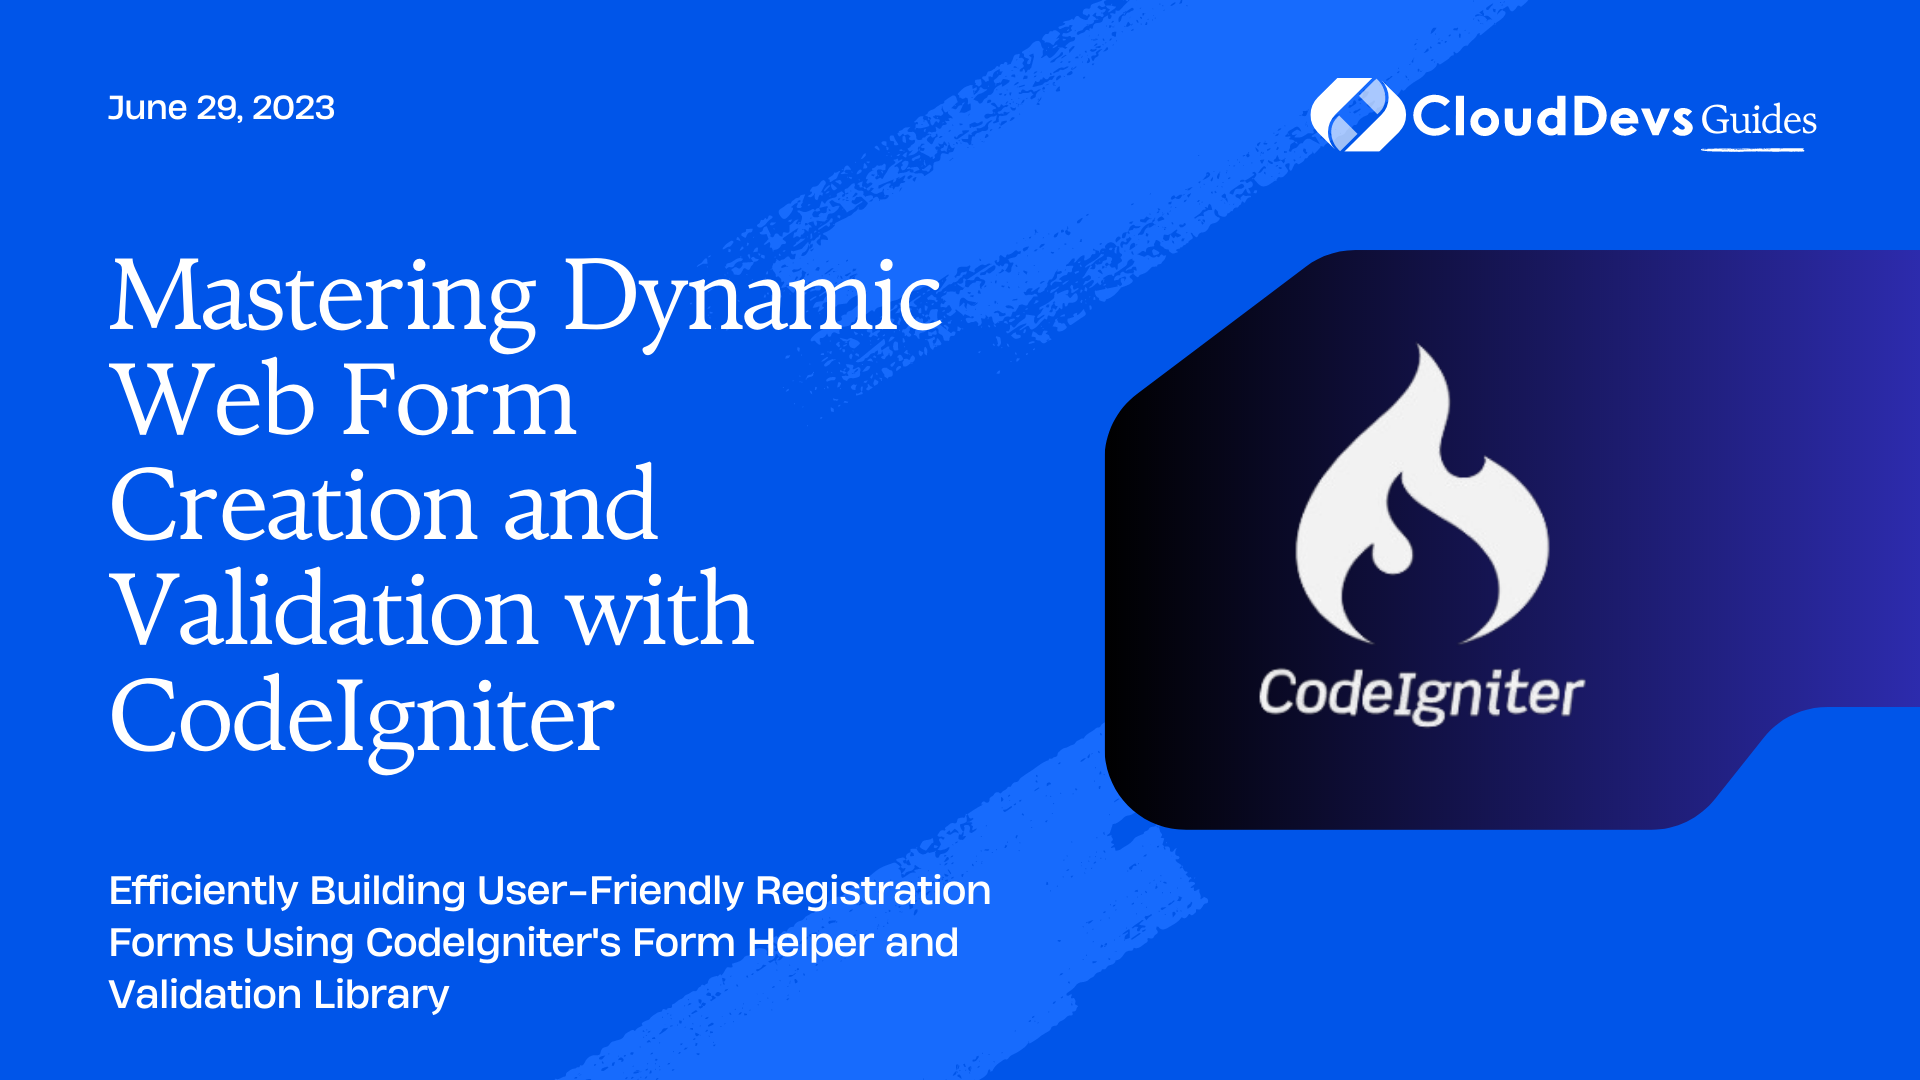 Mastering Dynamic Web Form Creation and Validation with CodeIgniter